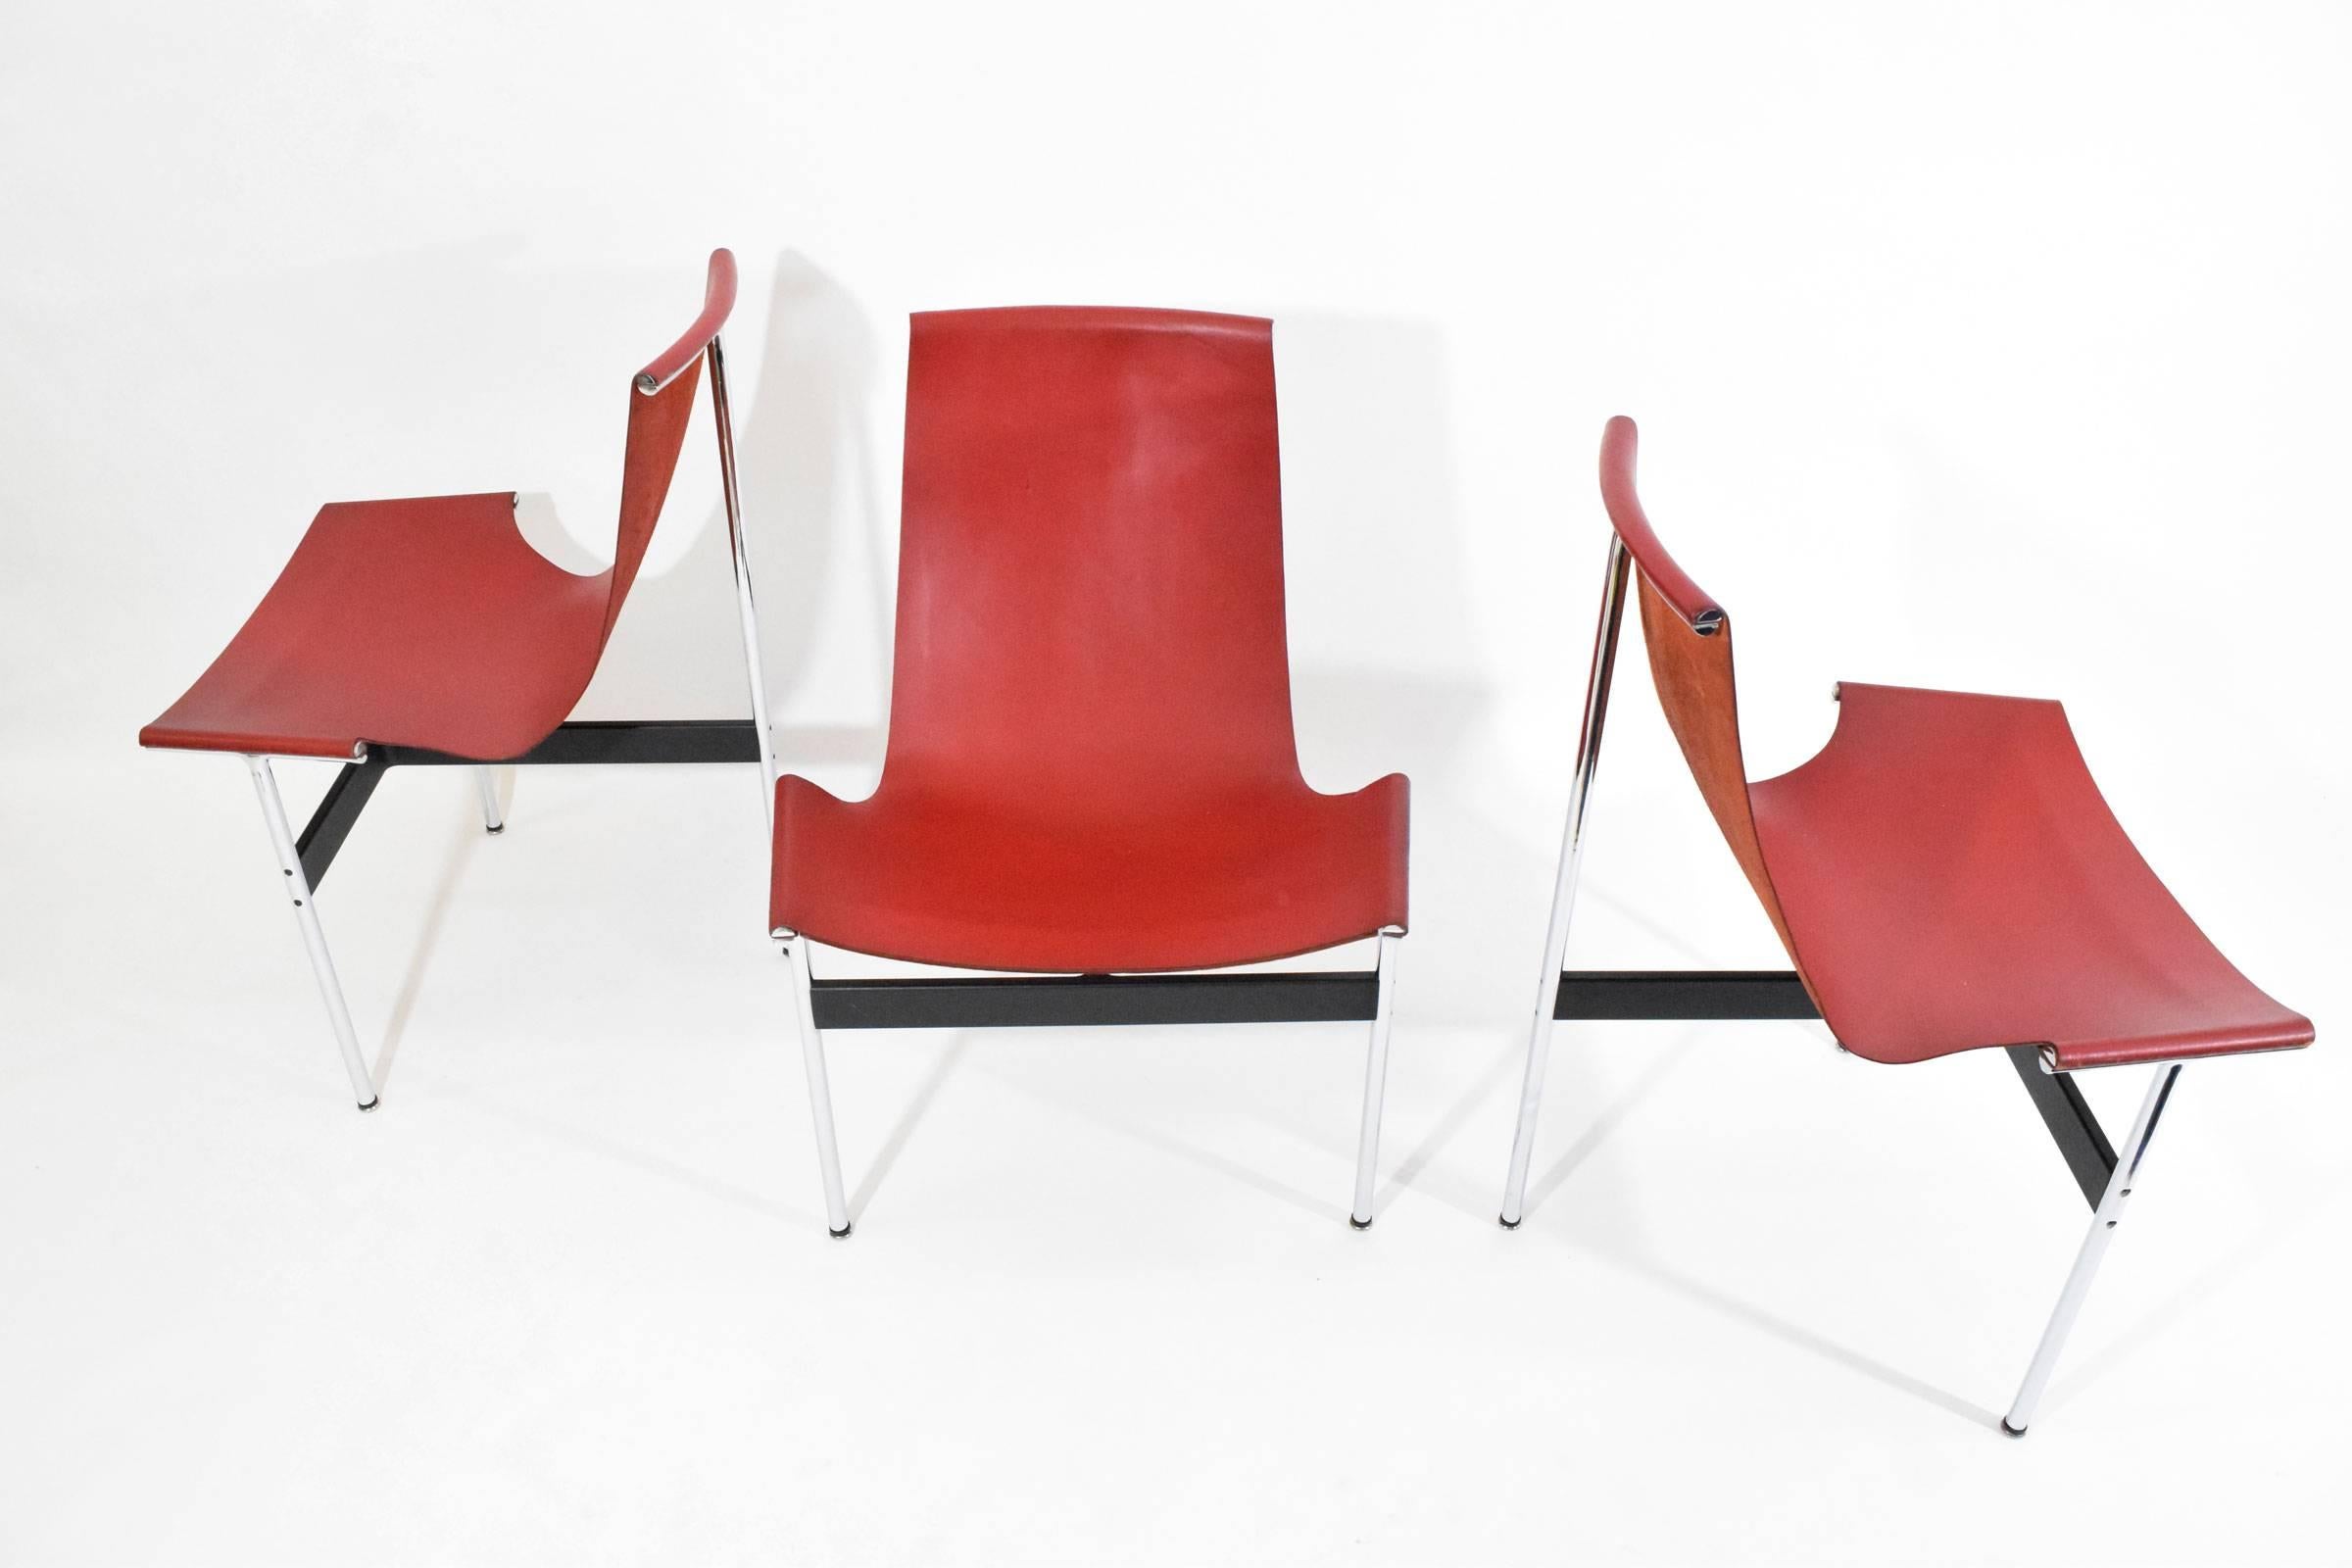 American Set of Six T-Chairs by Katavolos, Littell and Kelly